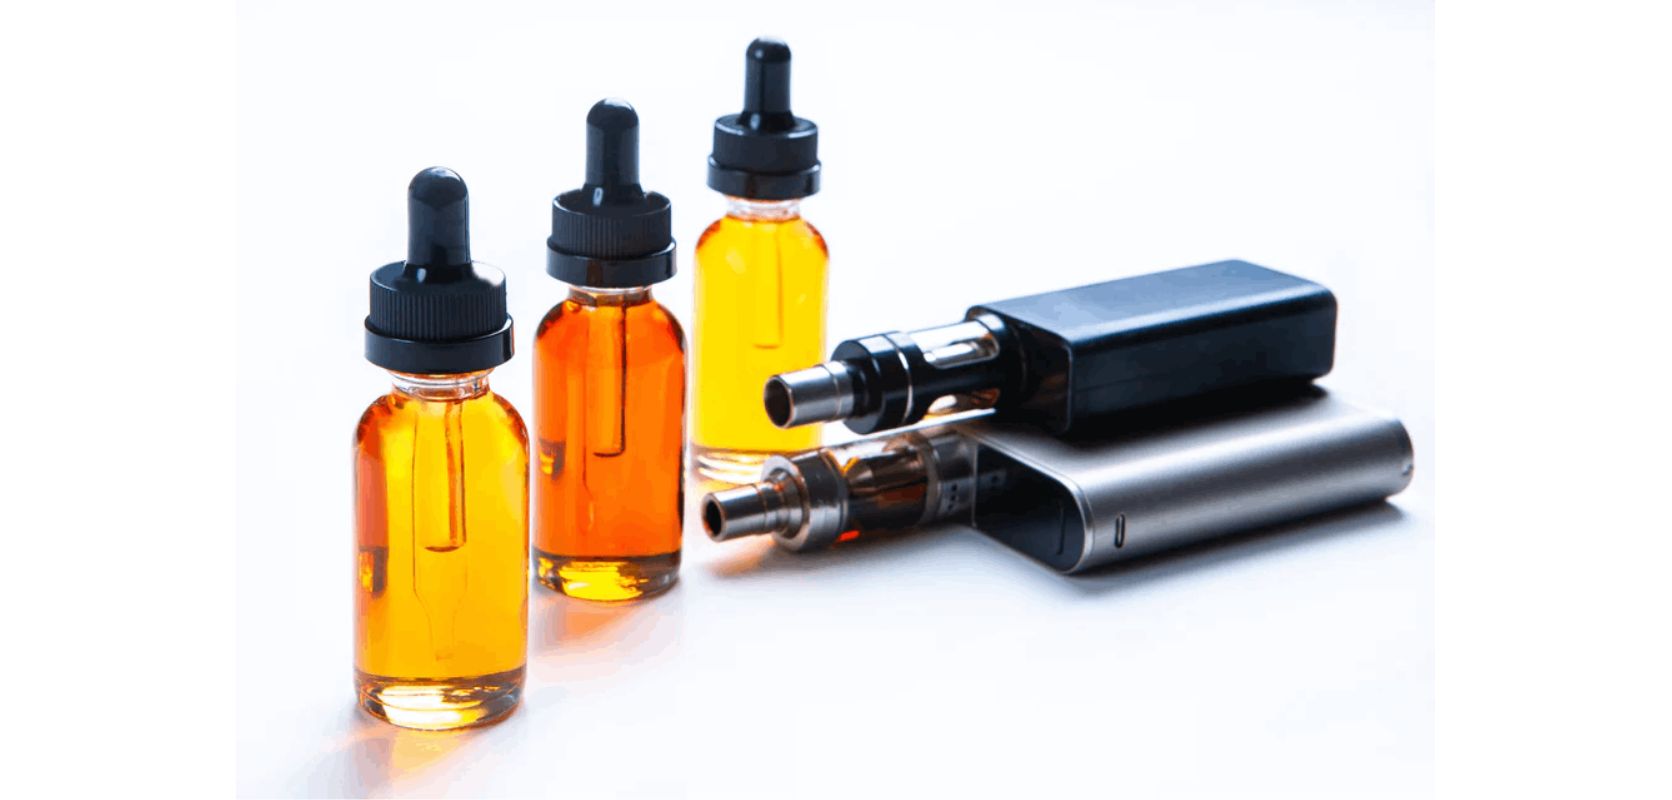 If you've been around the stoner's block, you already know that vaping is one of the most popular ways to enjoy cannabis. But what is vape juice and why should you get some today? 